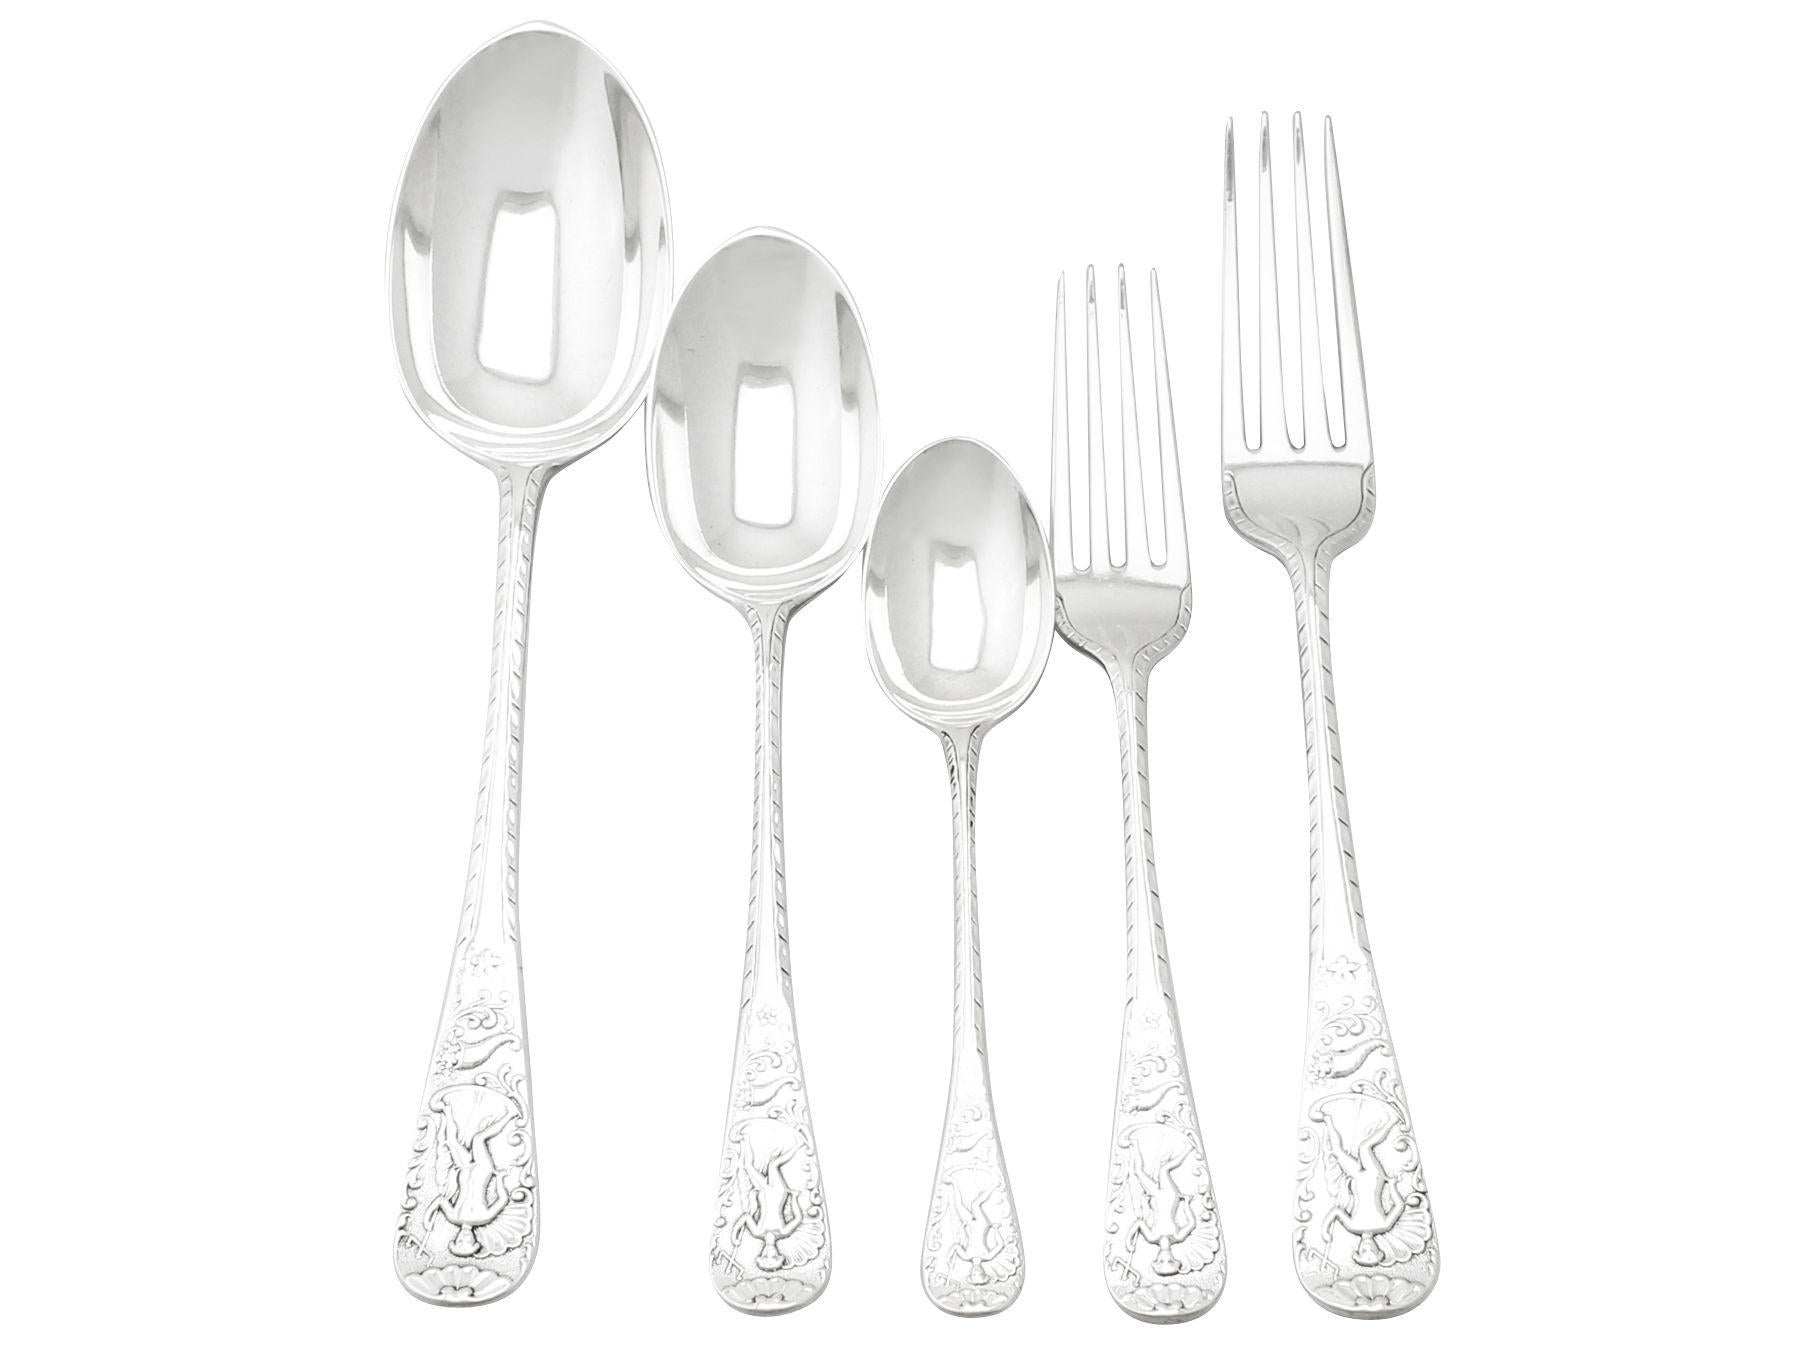 An exceptional, fine and impressive, rare antique Victorian English sterling silver Triton pattern flatware service for six persons; an addition to our dining silverware collection

The pieces of this exceptional antique Victorian sterling silver